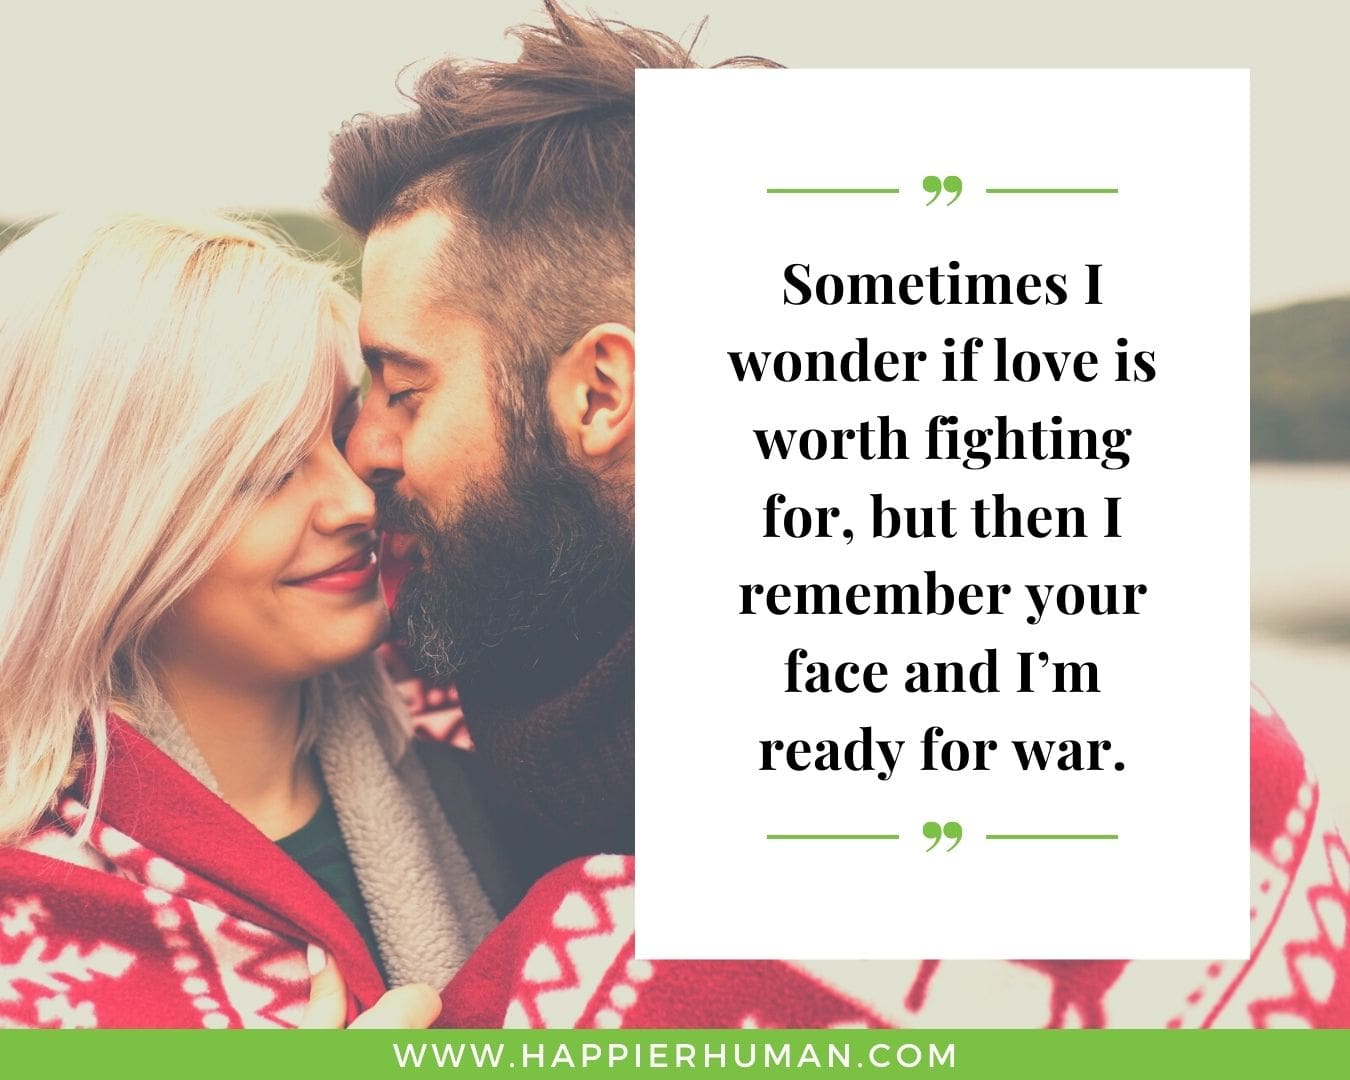 Romantic Love Messages - “Sometimes I wonder if love is worth fighting for, but then I remember your face and I’m ready for war.”